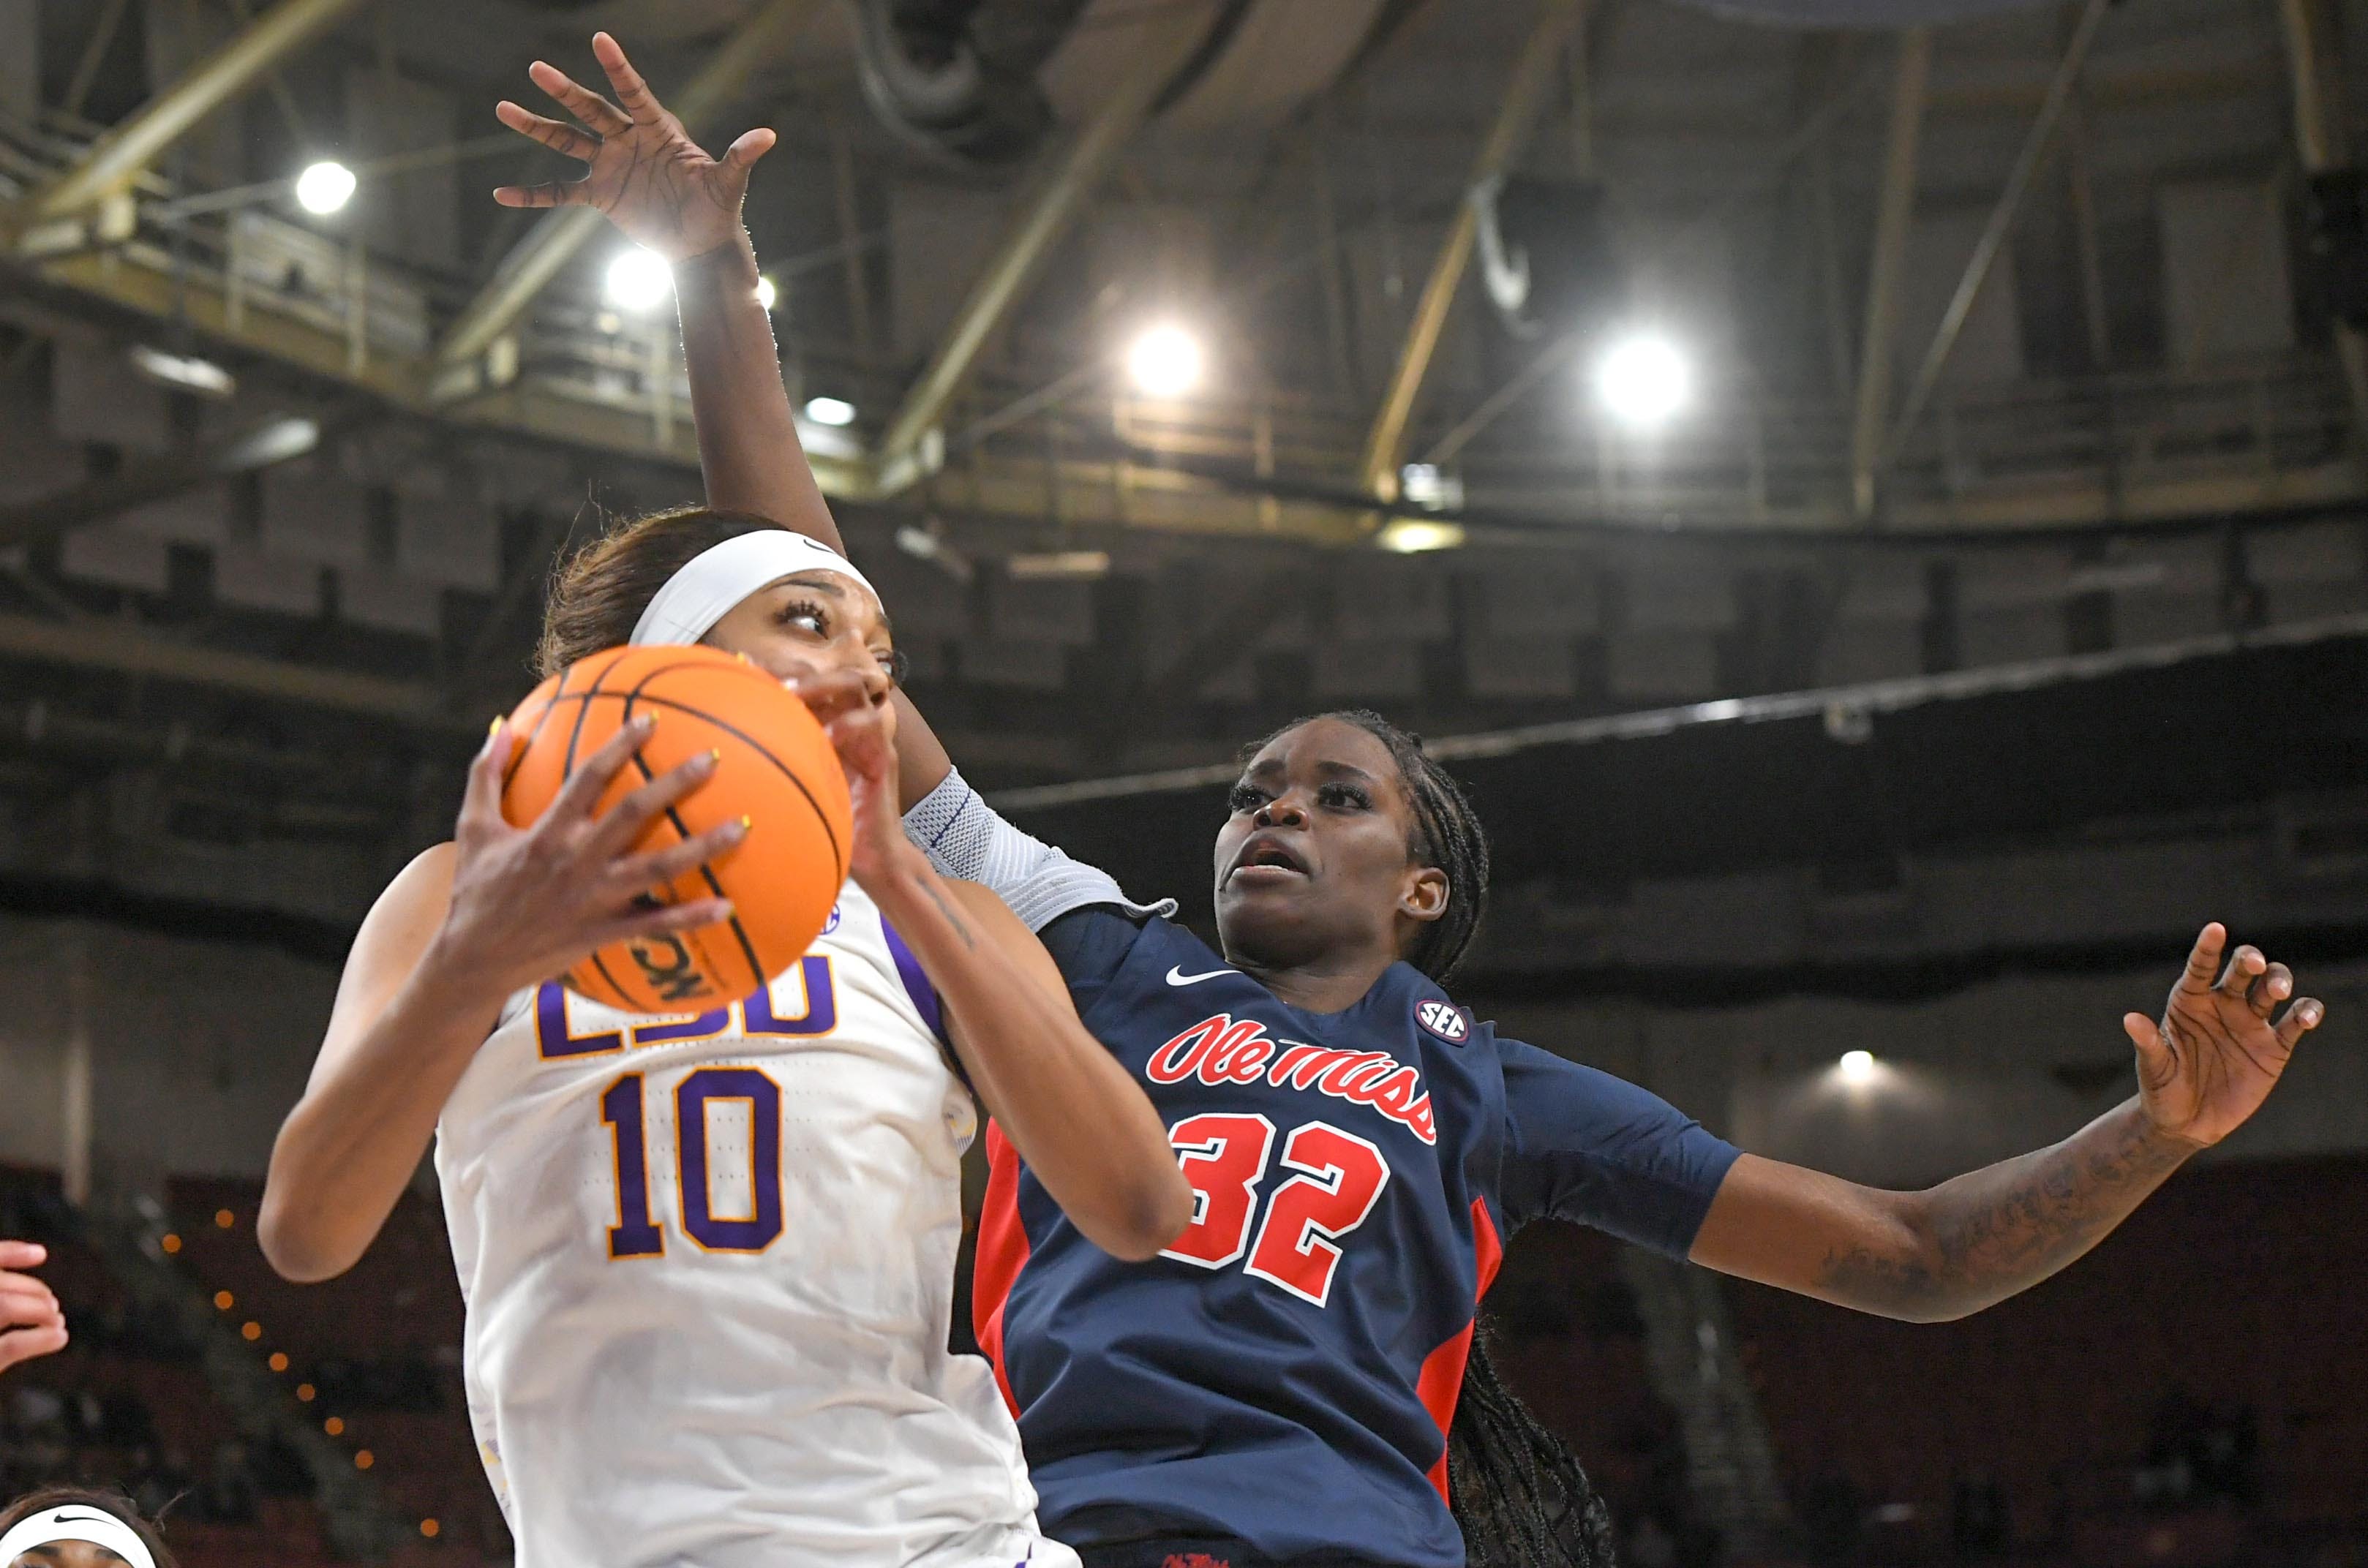 Louisiana State University forward Angel Reese (10) rebounds near Ole Miss center Rita Igbokwe (32) during the fourth quarter of the SEC Women's Basketball Tournament game at the Bon Secours Wellness Arena in Greenville, S.C. Saturday, March 9, 2024.